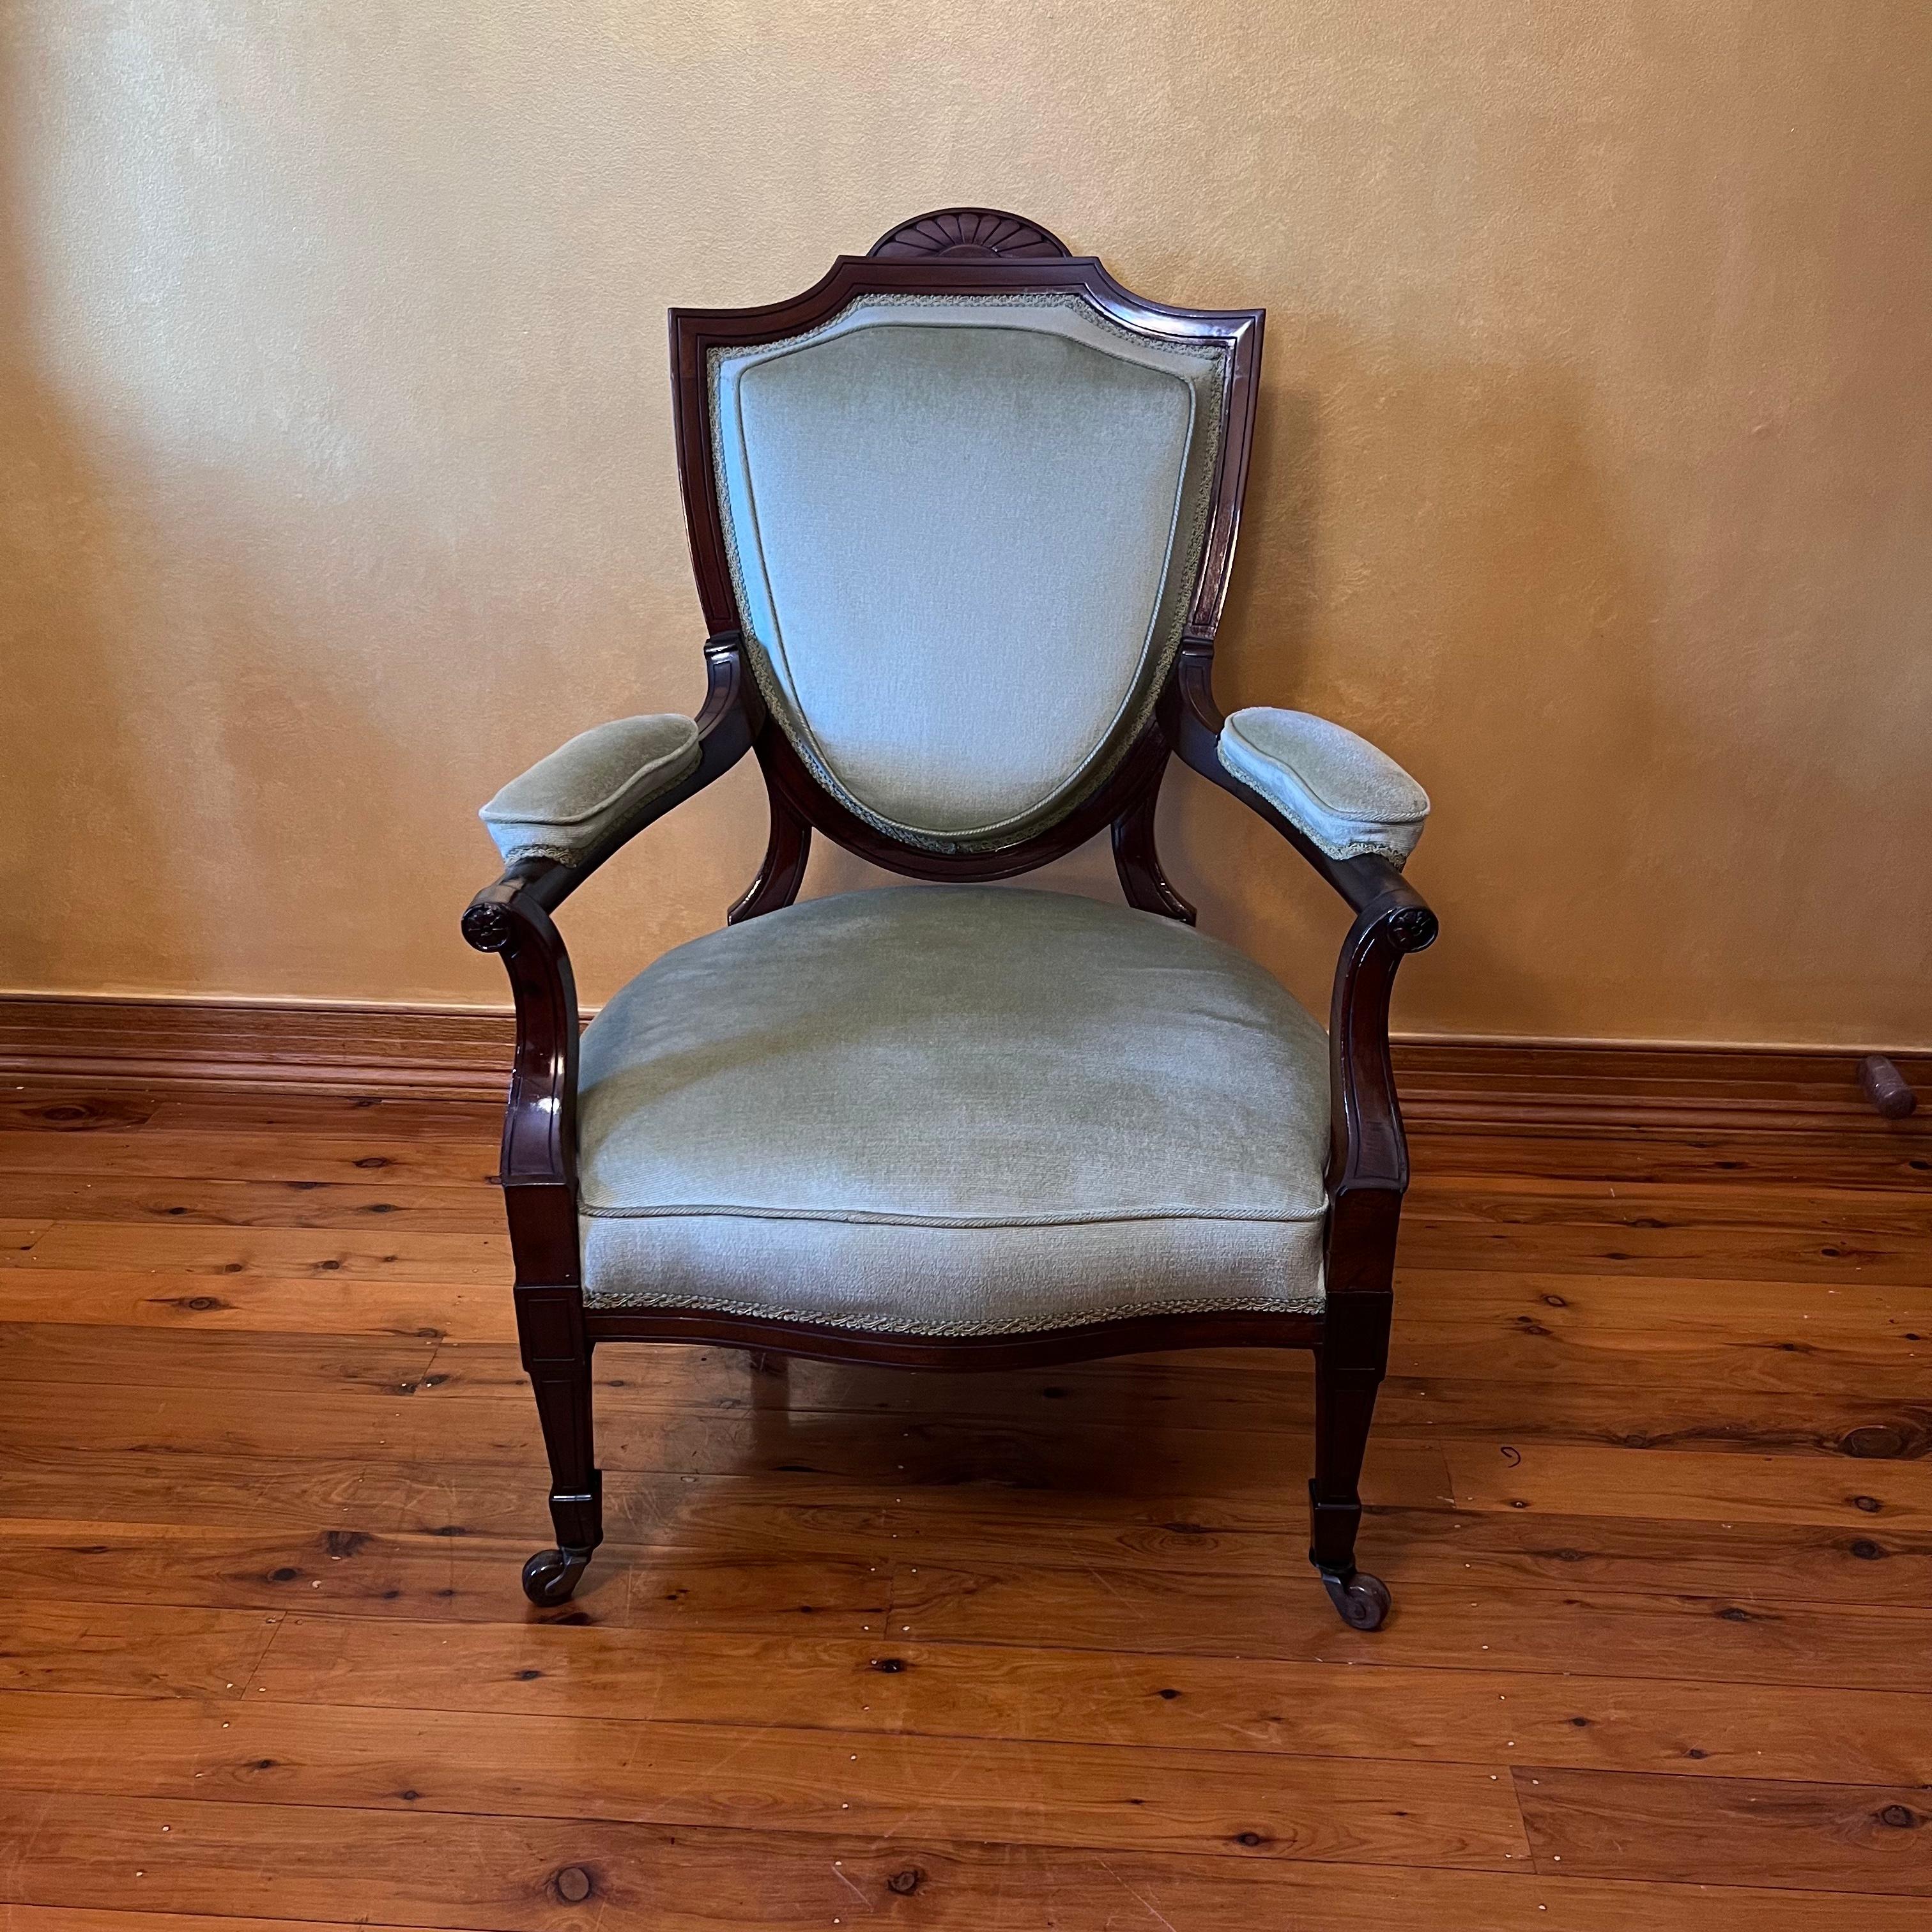 Two armchairs one larger and one smaller with two matching armless chairs, armchairs have a padded seat and pack with armrest both come with castors, armless have carved back detail with padded green velvet seats

Circa: Early20th Century